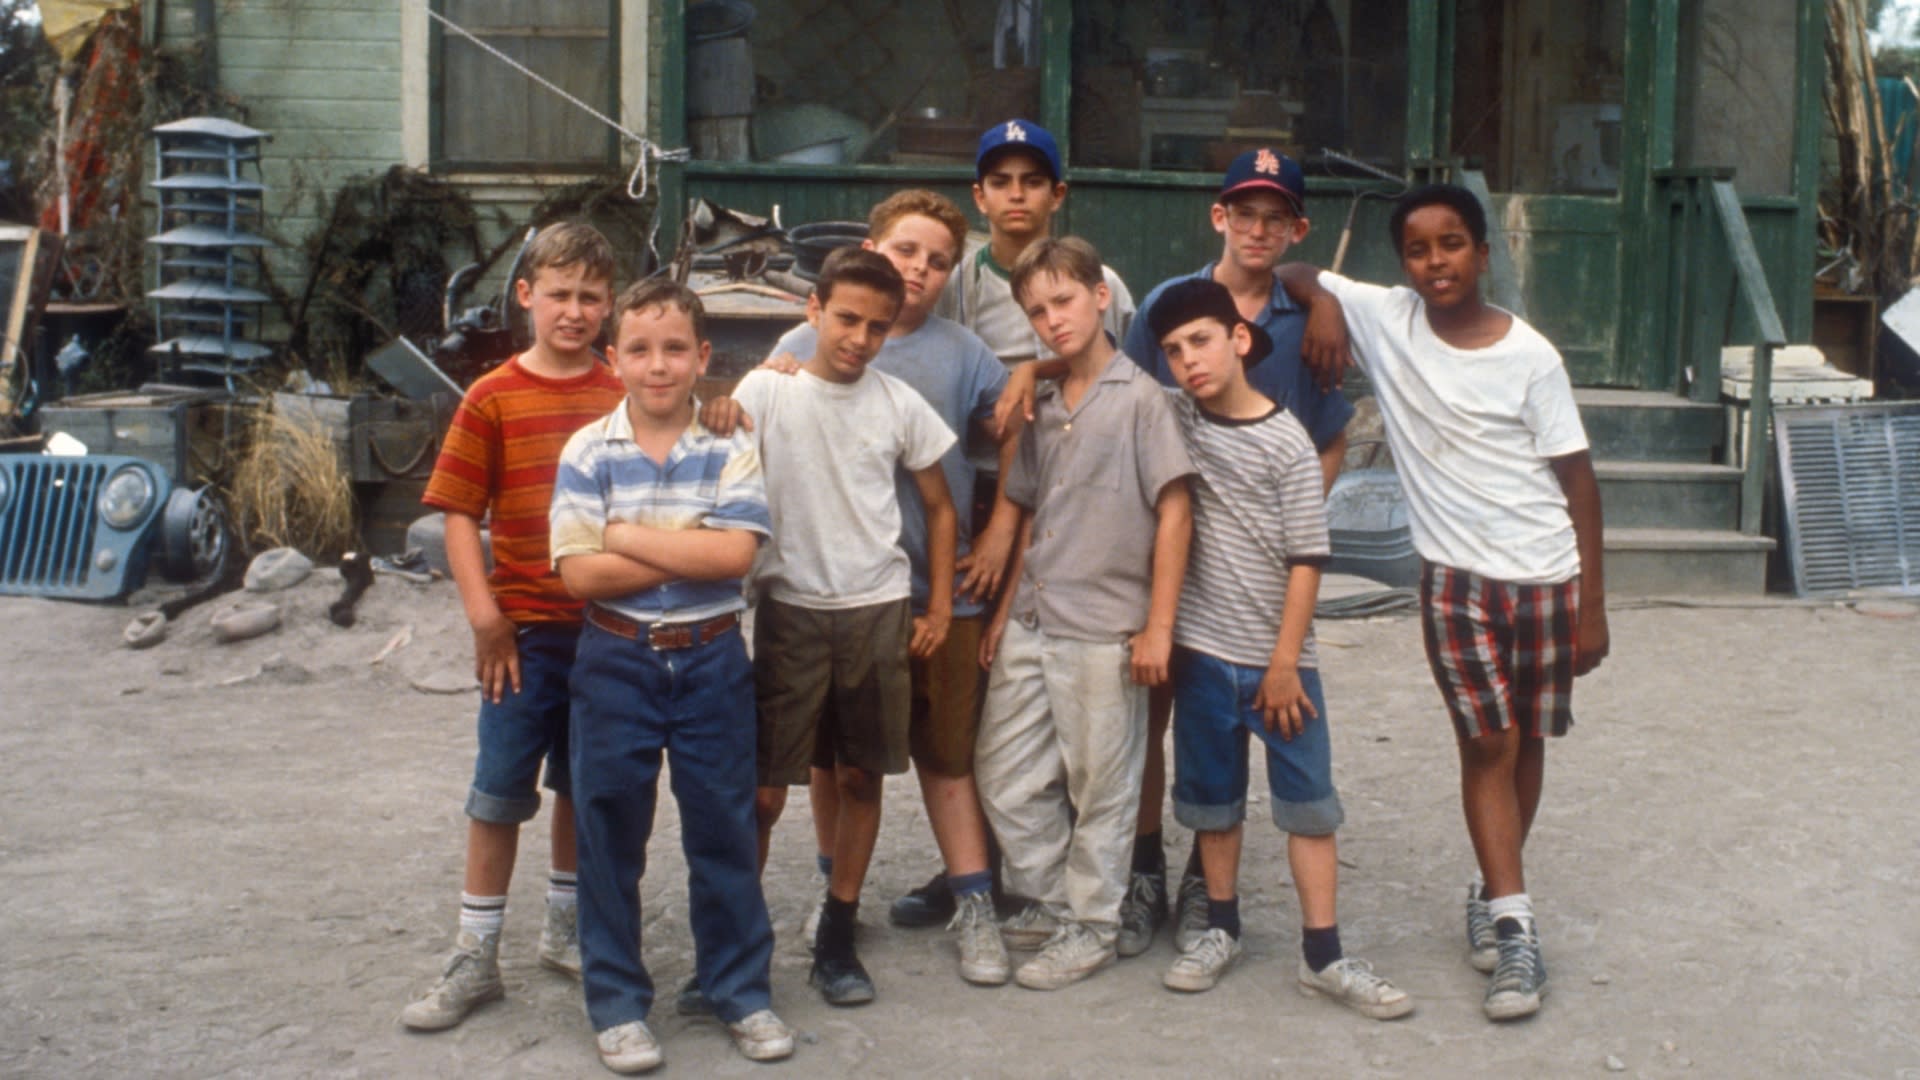 'The Sandlot' Is Being Turned into a TV Series Starring the Original Cast